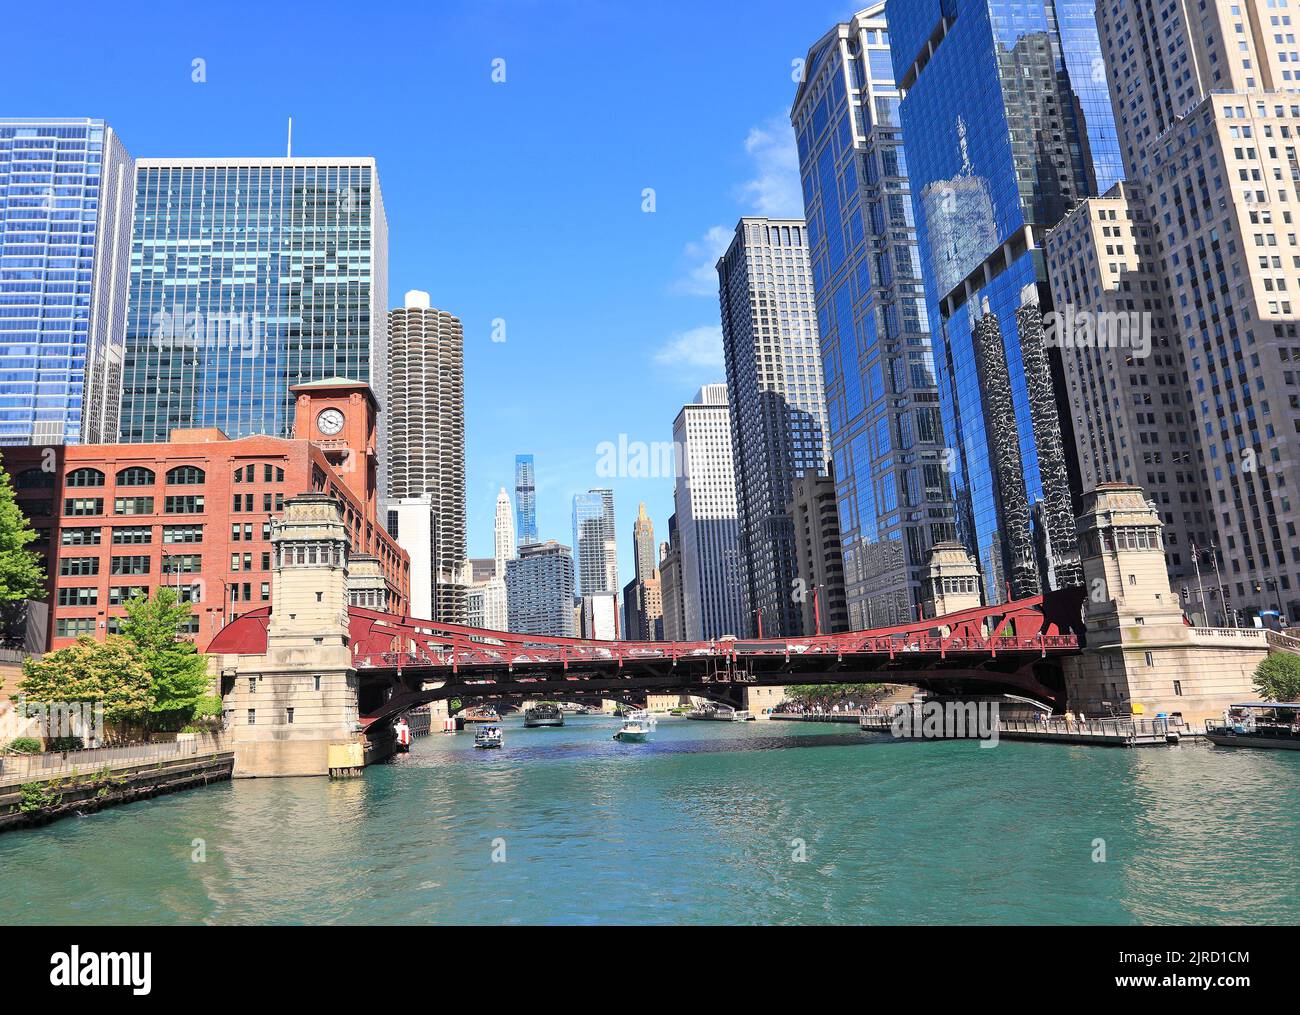 Chicago sightseeing cruise and skyscrapers skyline on the river, Illinois, USA Stock Photo